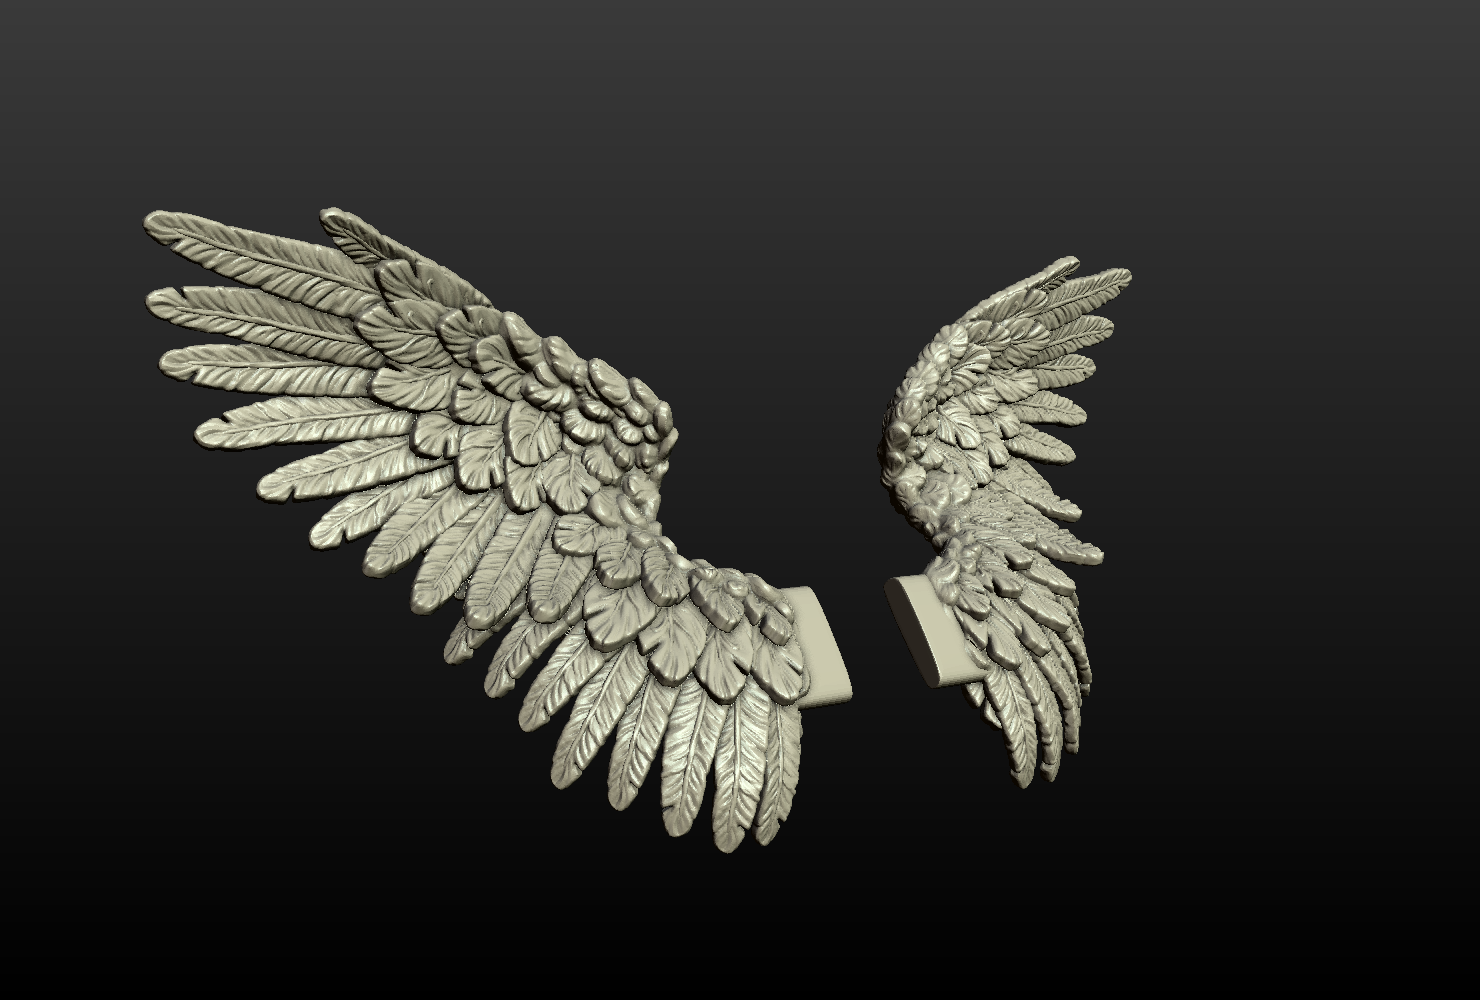 wings 3d character